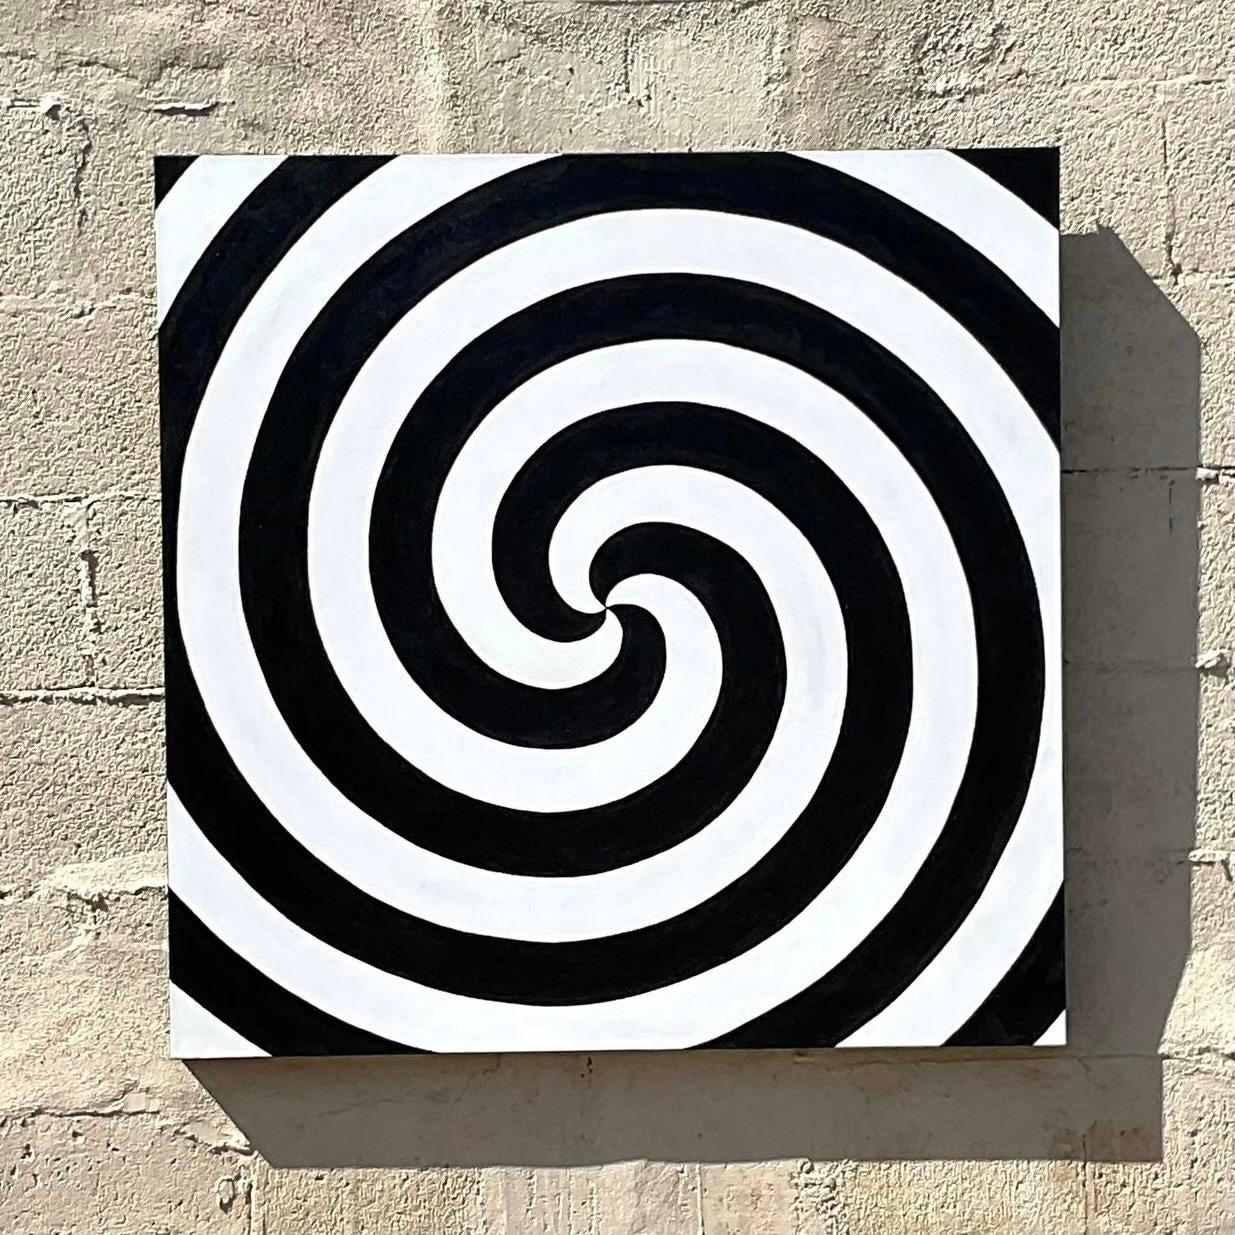 Fabulous vintage Signed original oil painting. A chic Op Art swirl design in black
and white. Signed on the reverse. Acquired from a Palm Beach estate.